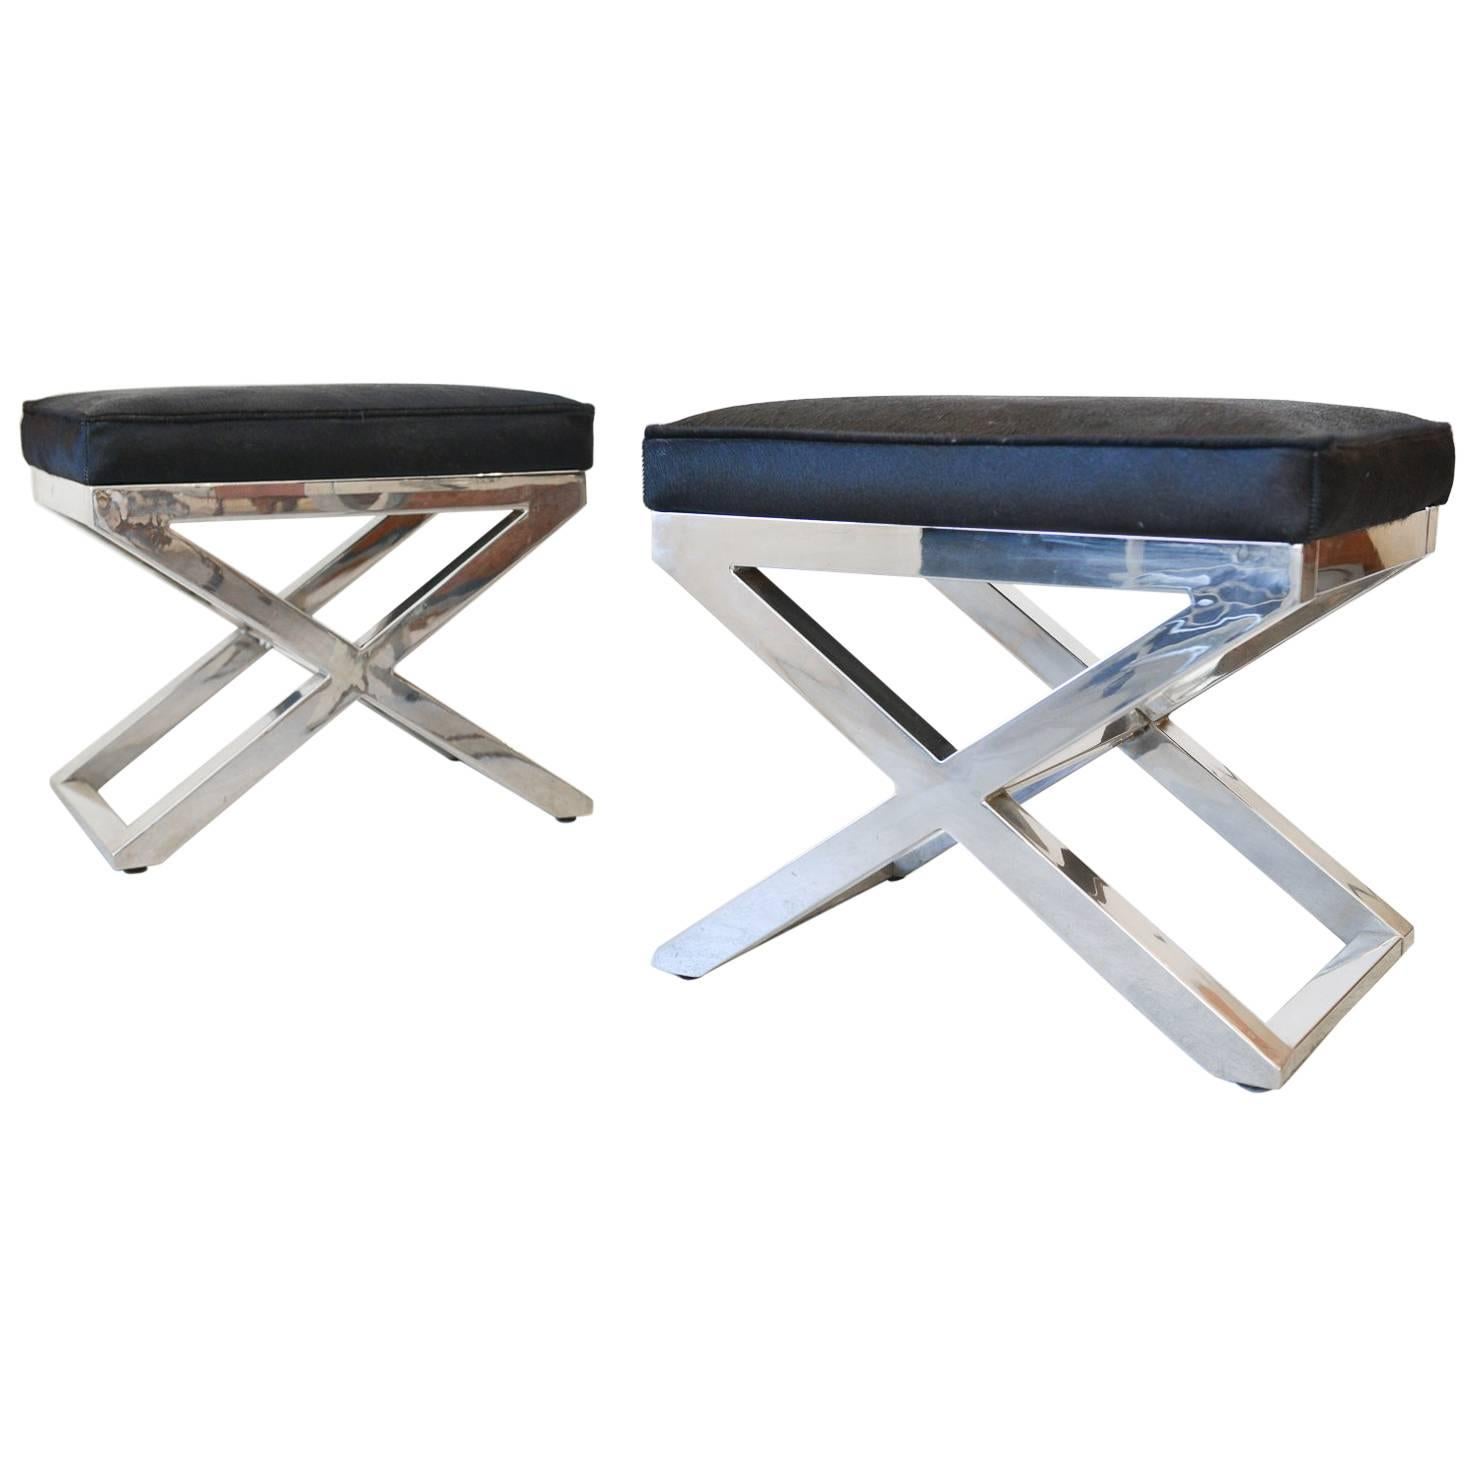 Pair of Chrome X-Base Stools with Cowhide Seats